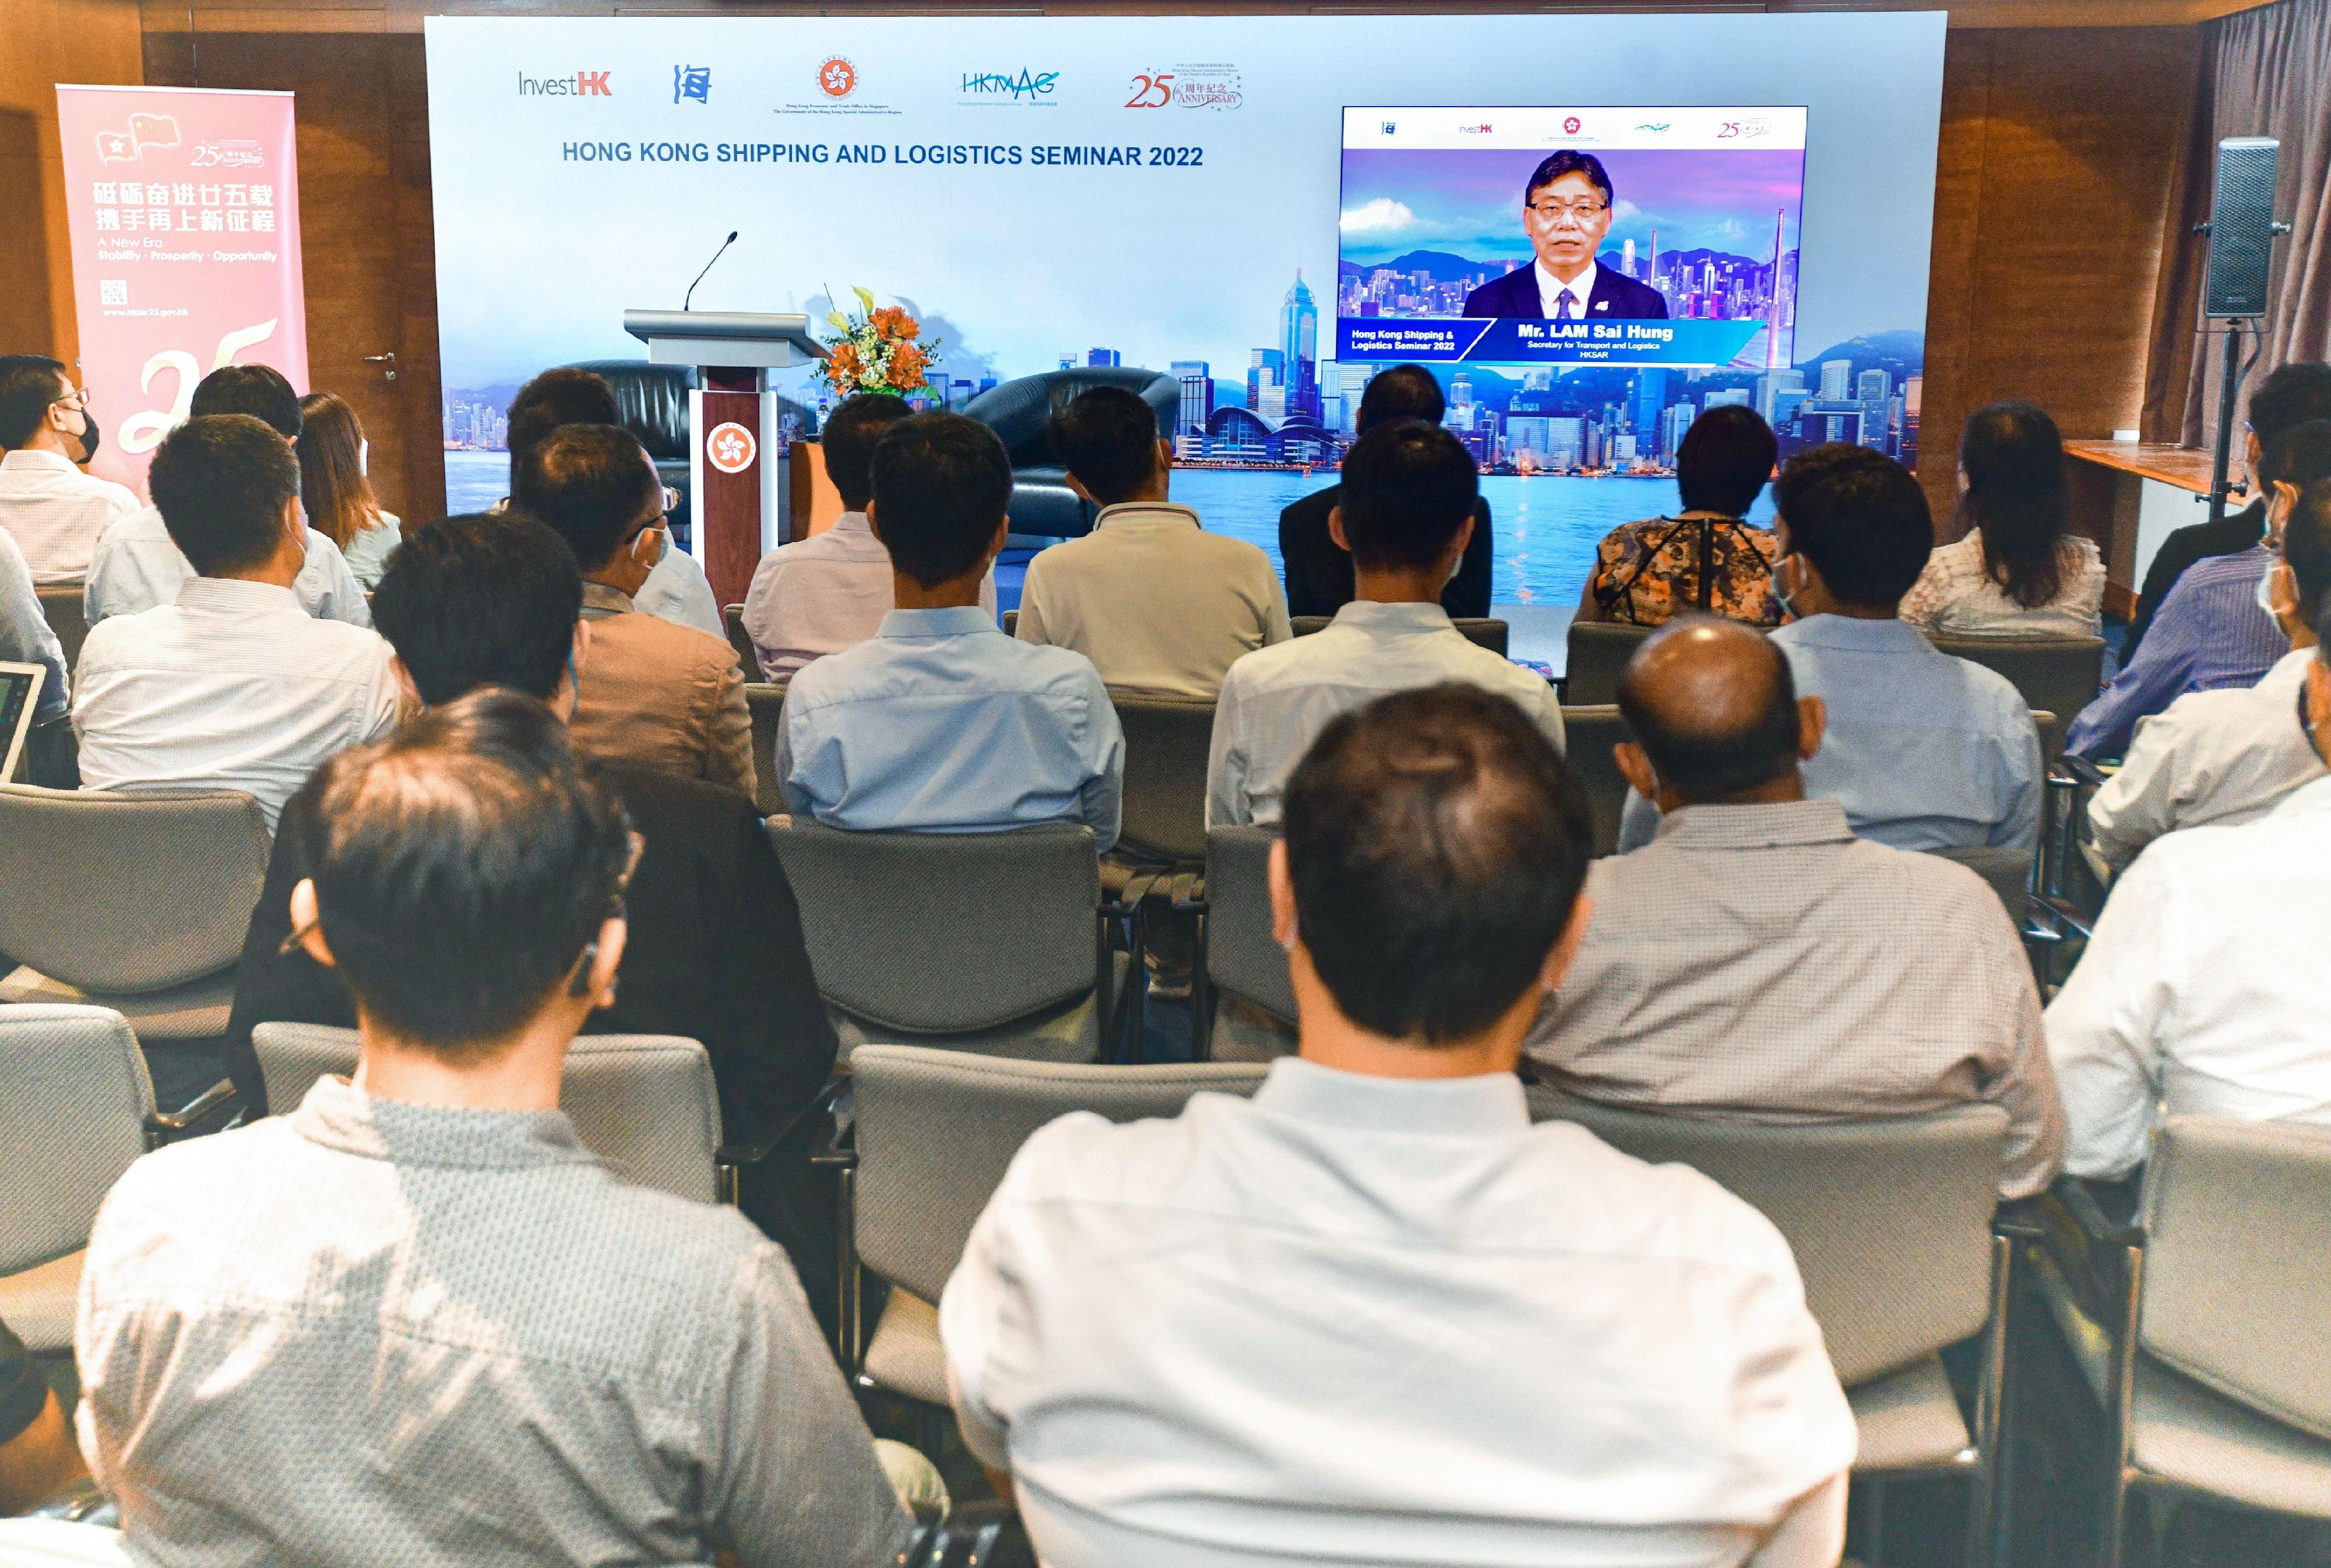 The Hong Kong Economic and Trade Office in Singapore held a business seminar today (August 18) entitled "Development of Hong Kong Shipping Registry and logistics opportunities associated with Greater Bay Area" to celebrate the 25th anniversary of the establishment of the Hong Kong Special Administrative Region. Photo shows the Secretary for Transport and Logistics, Mr Lam Sai-hung, giving a virtual keynote speech at the business seminar.